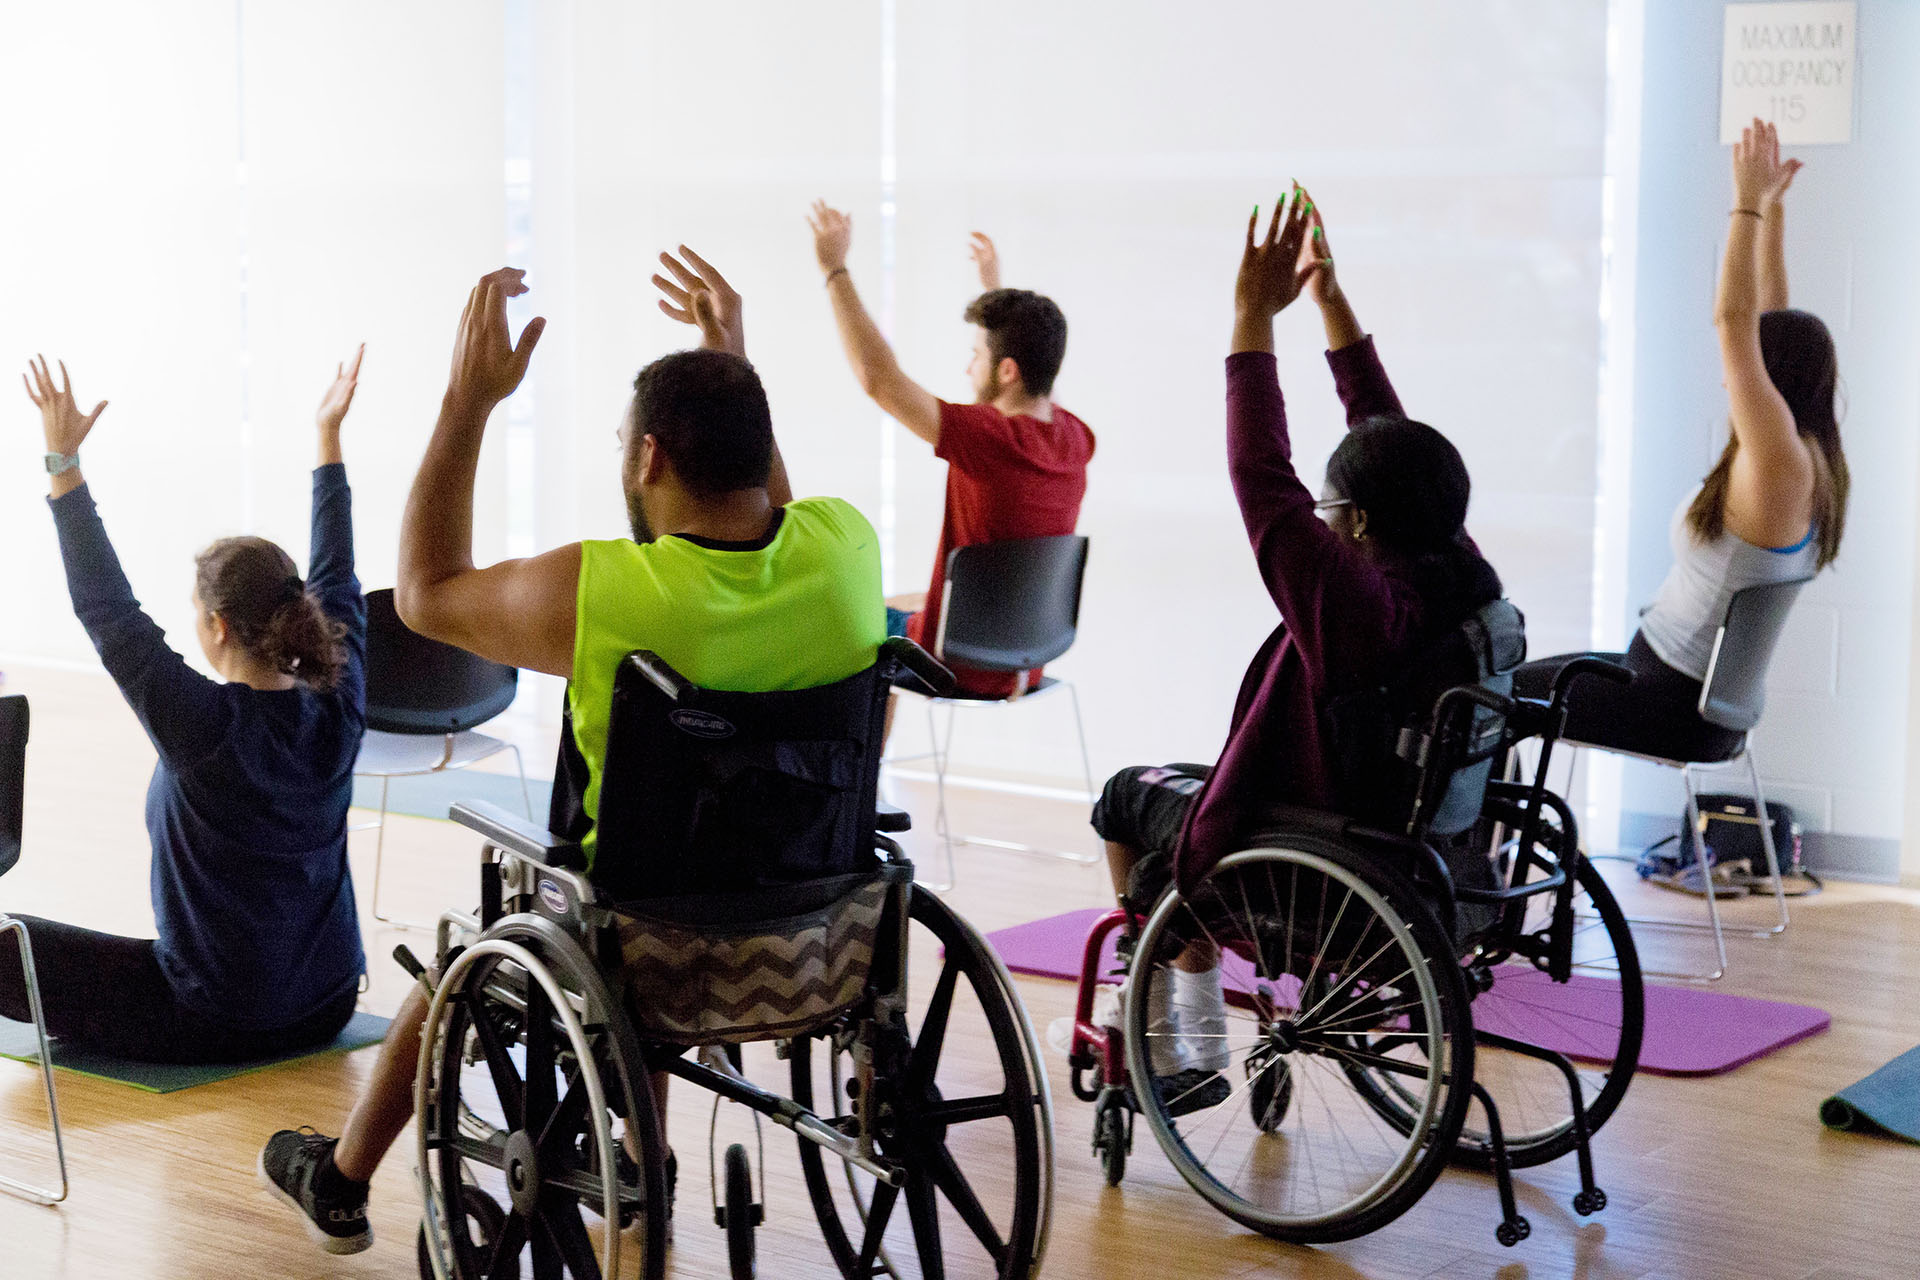 UF’s Disability Resource Center recognized as No. 6 for student access options